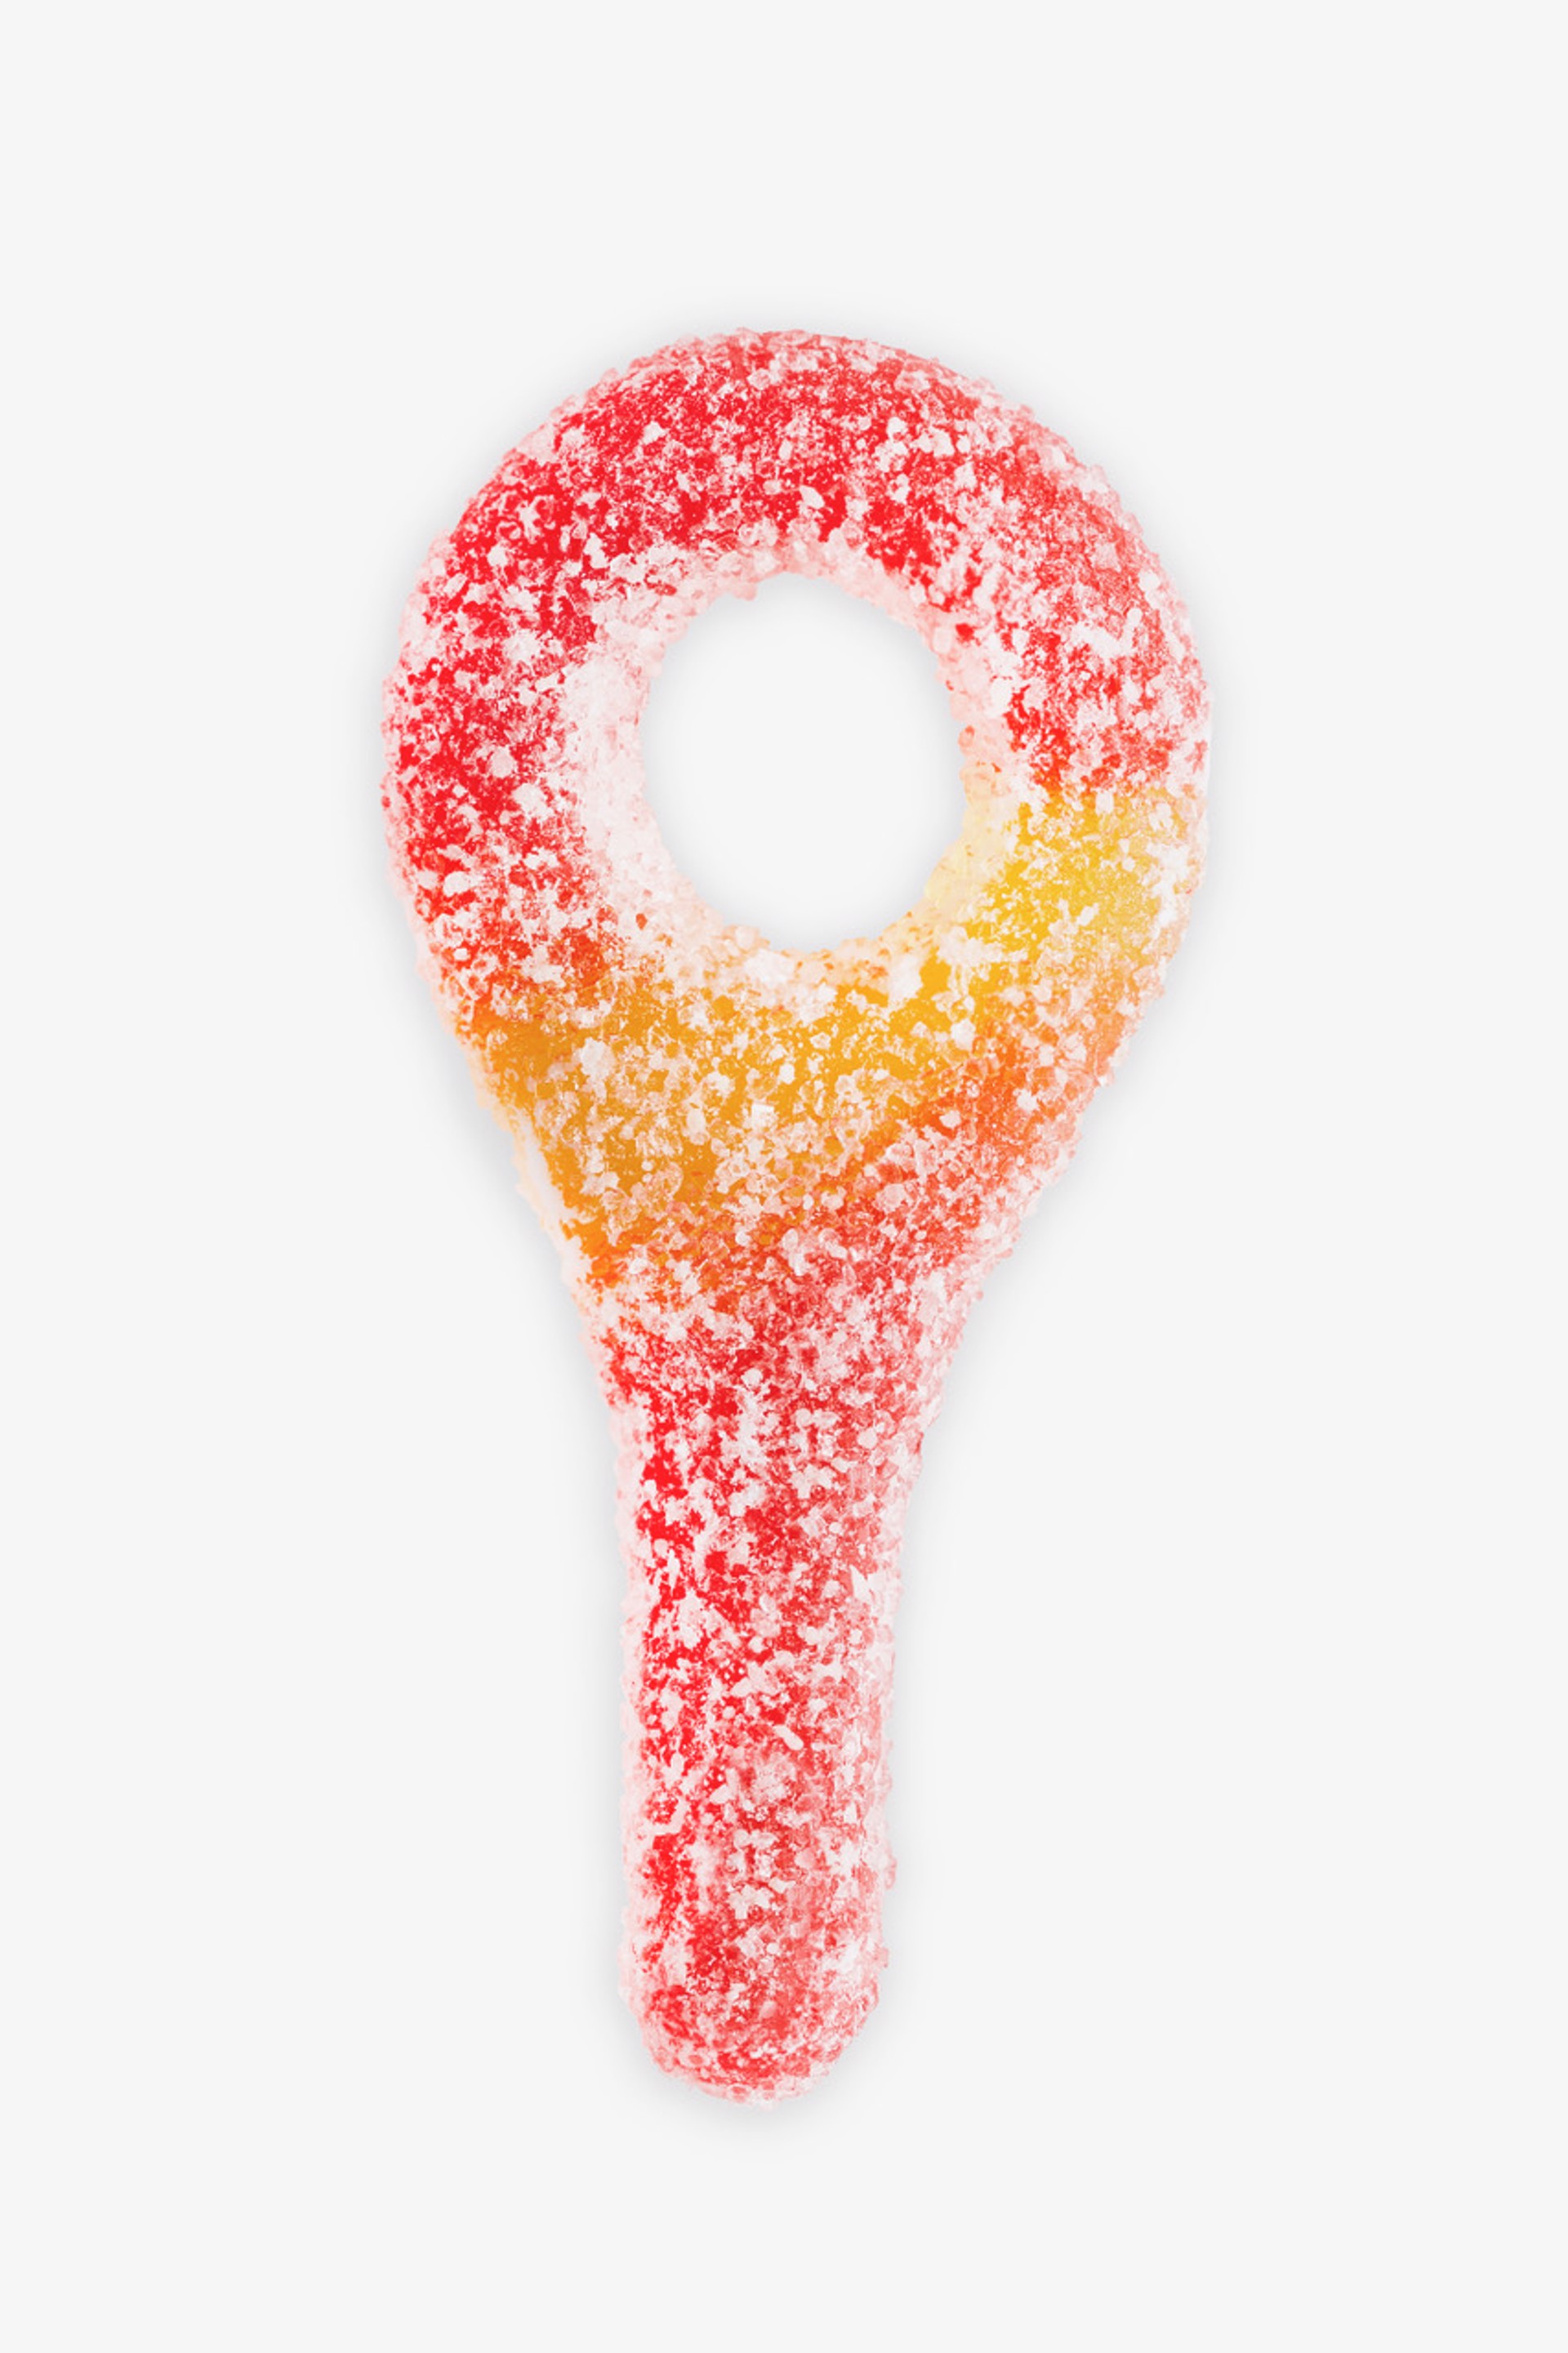 Sour Key - Red / Yellow by Peter Andrew Lusztyk / Refined Sugar